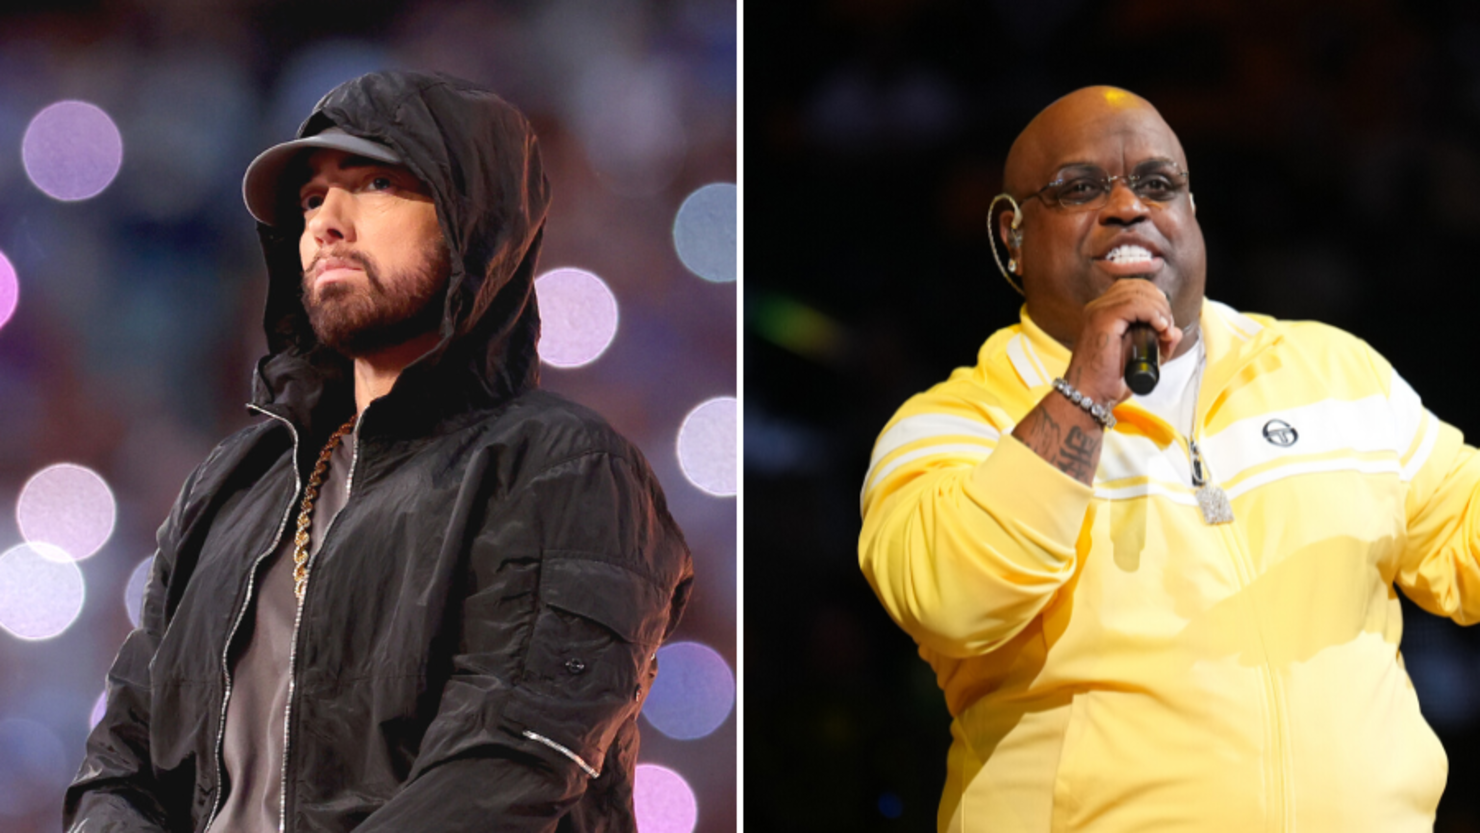 Eminem and CeeLo Green